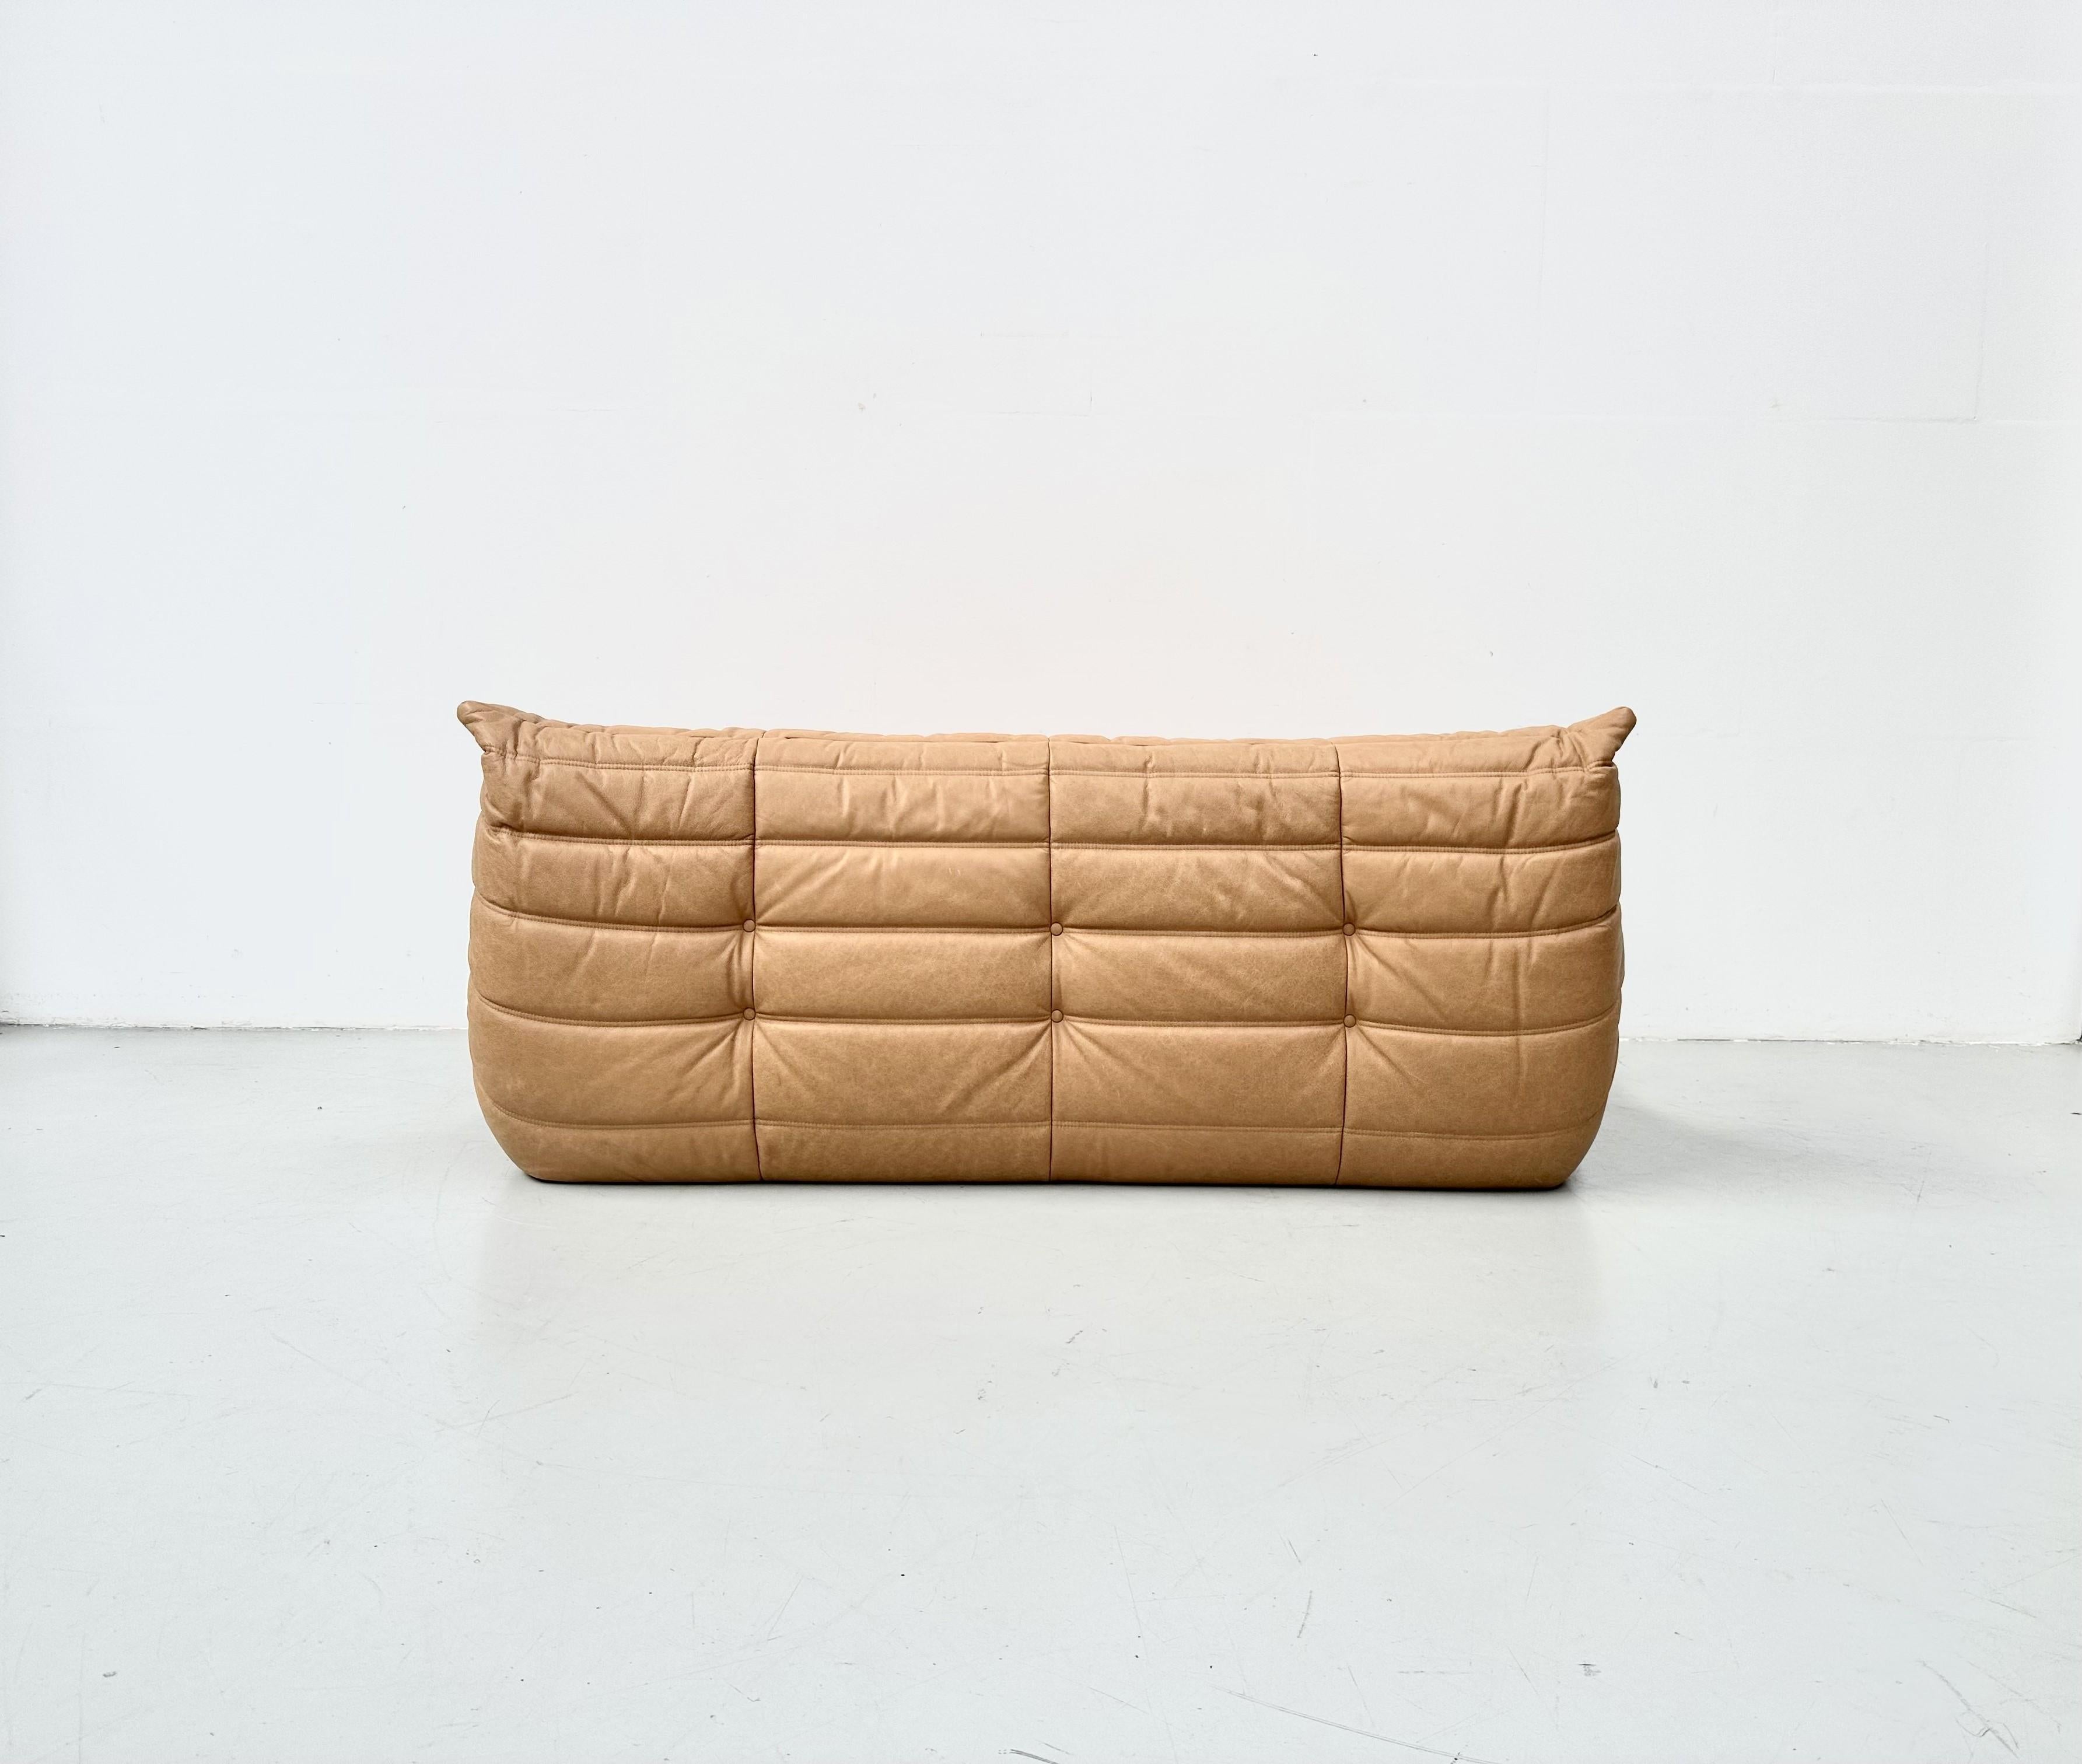 French Togo Sofa in Camel Leather by Michel Ducaroy for Ligne Roset. For Sale 5